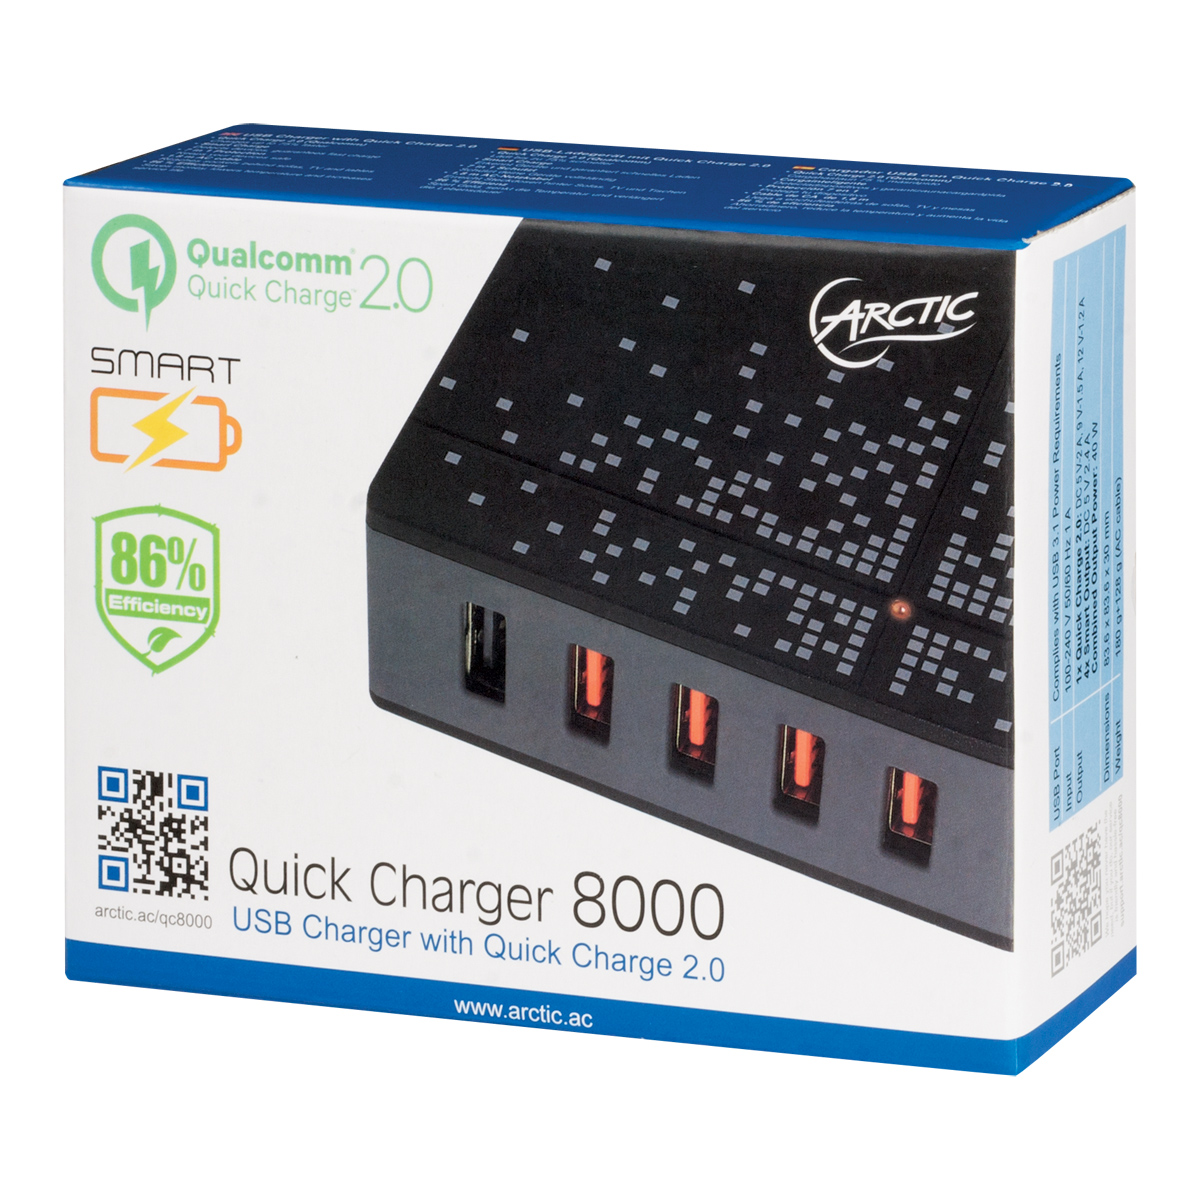 Quick_Charger_8000_UK_G06